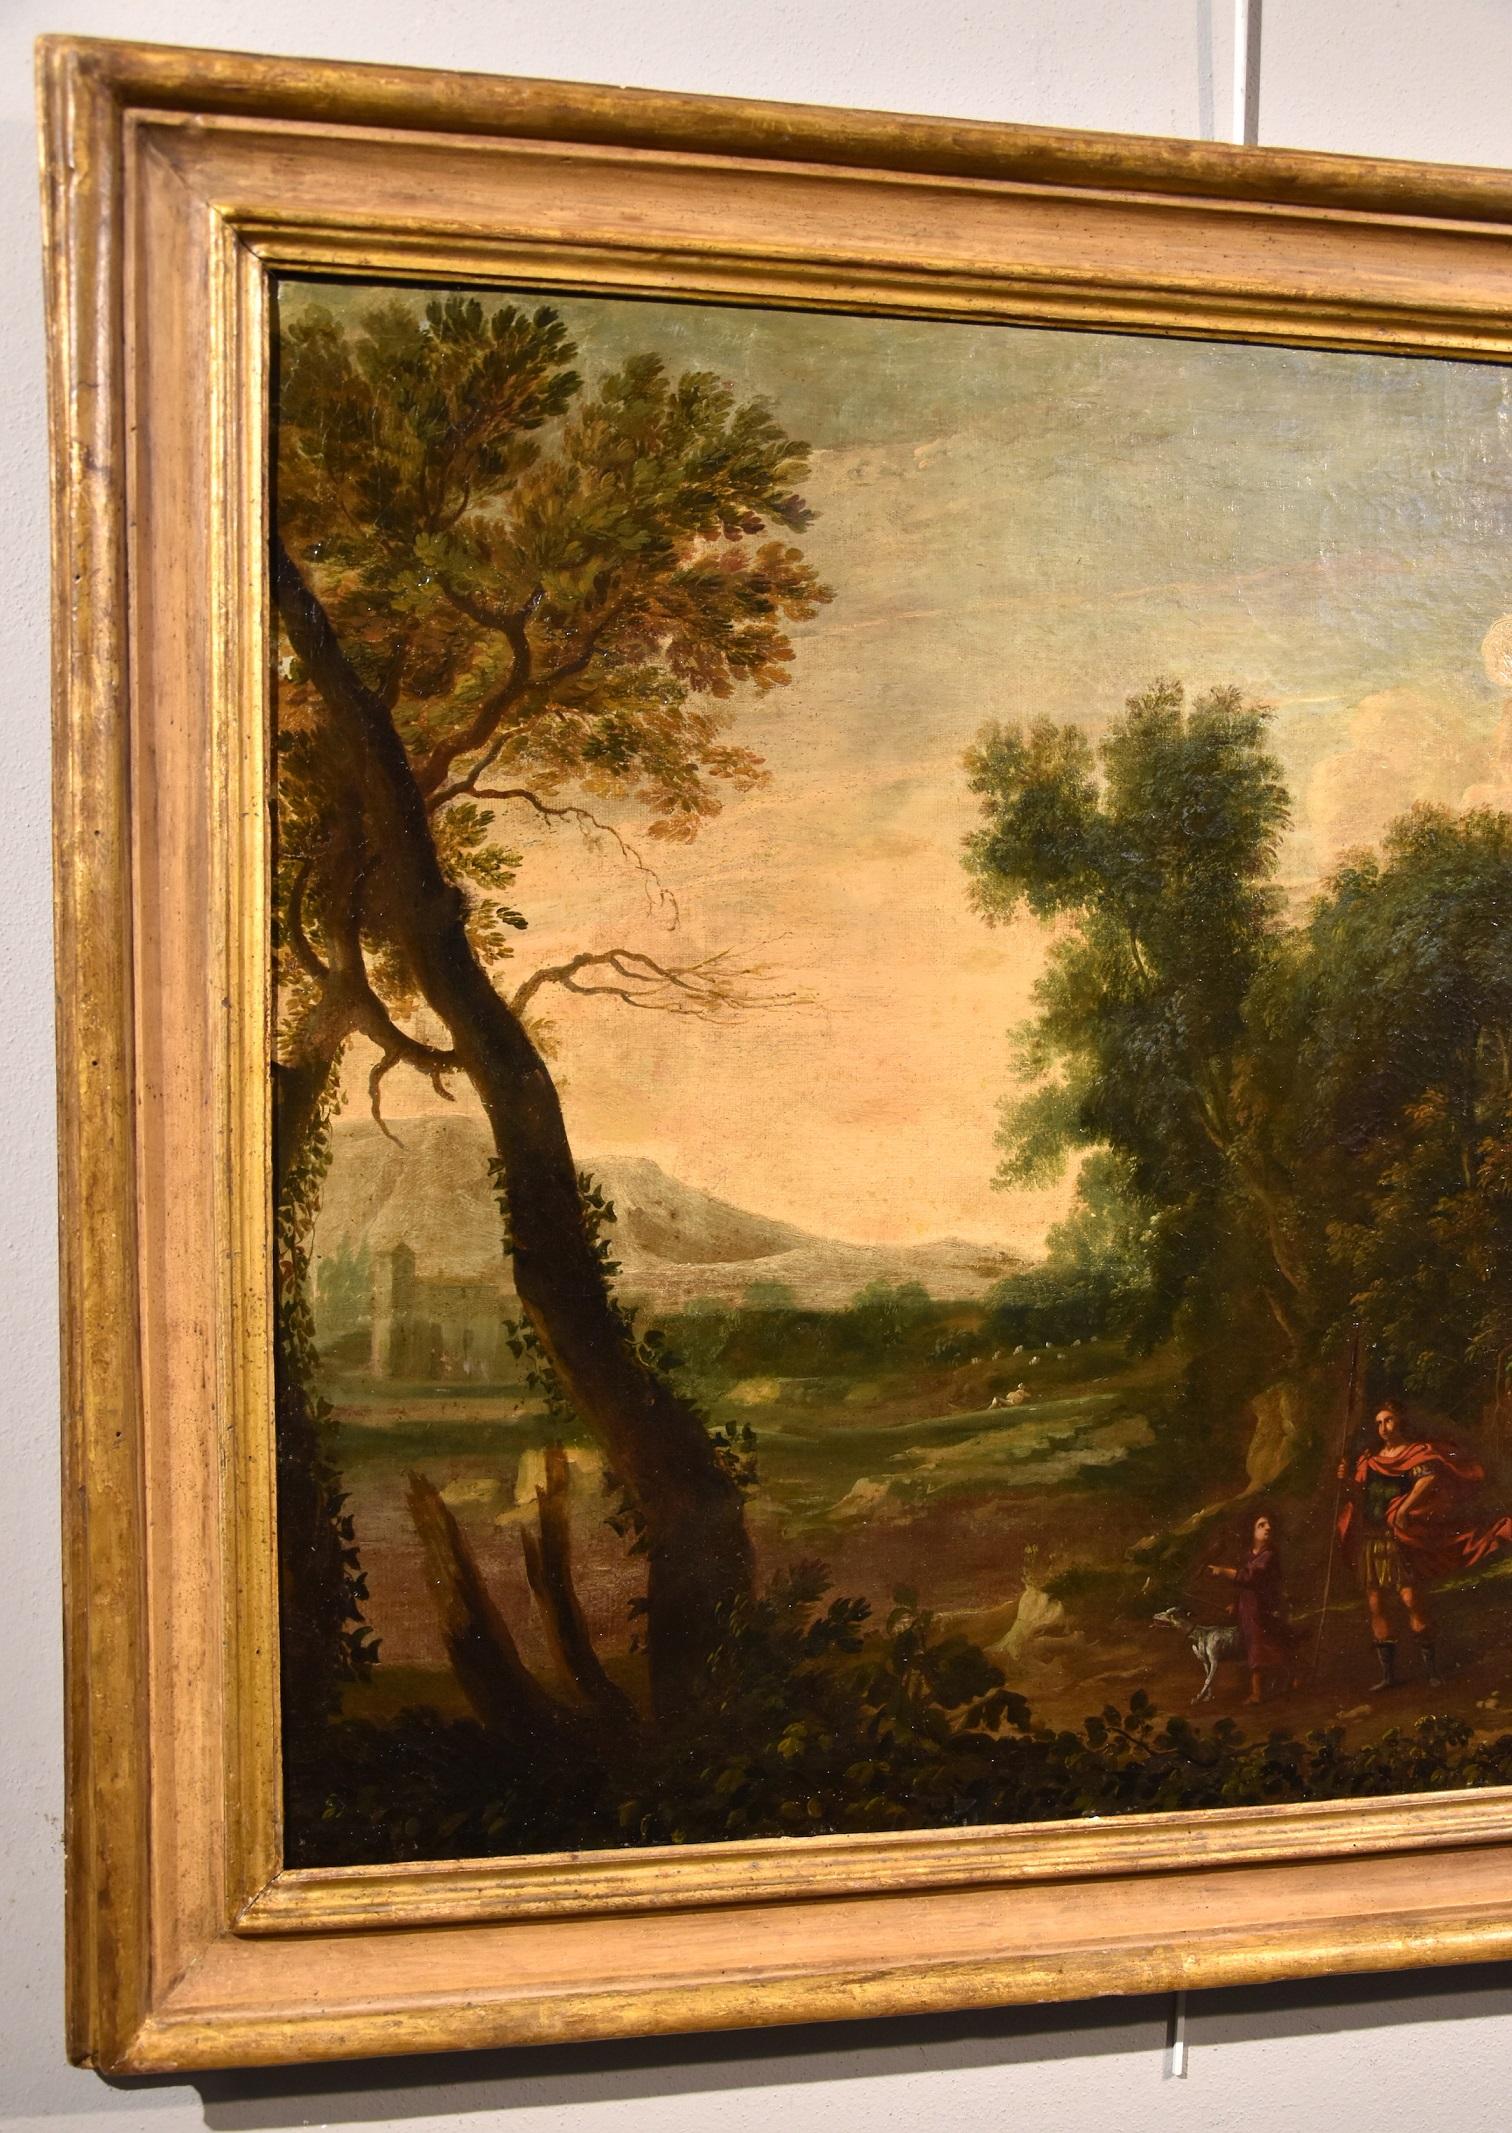 Gaspard Dughet, called Gaspard Poussin (Rome 1615 - 1675) - attributable to
Wooded landscape of the Roman countryside with the Archangel Raphael and Tobiolo

oil painting on canvas
second half of the 17th century
(cm.) 75 x 98, with frame 91 x